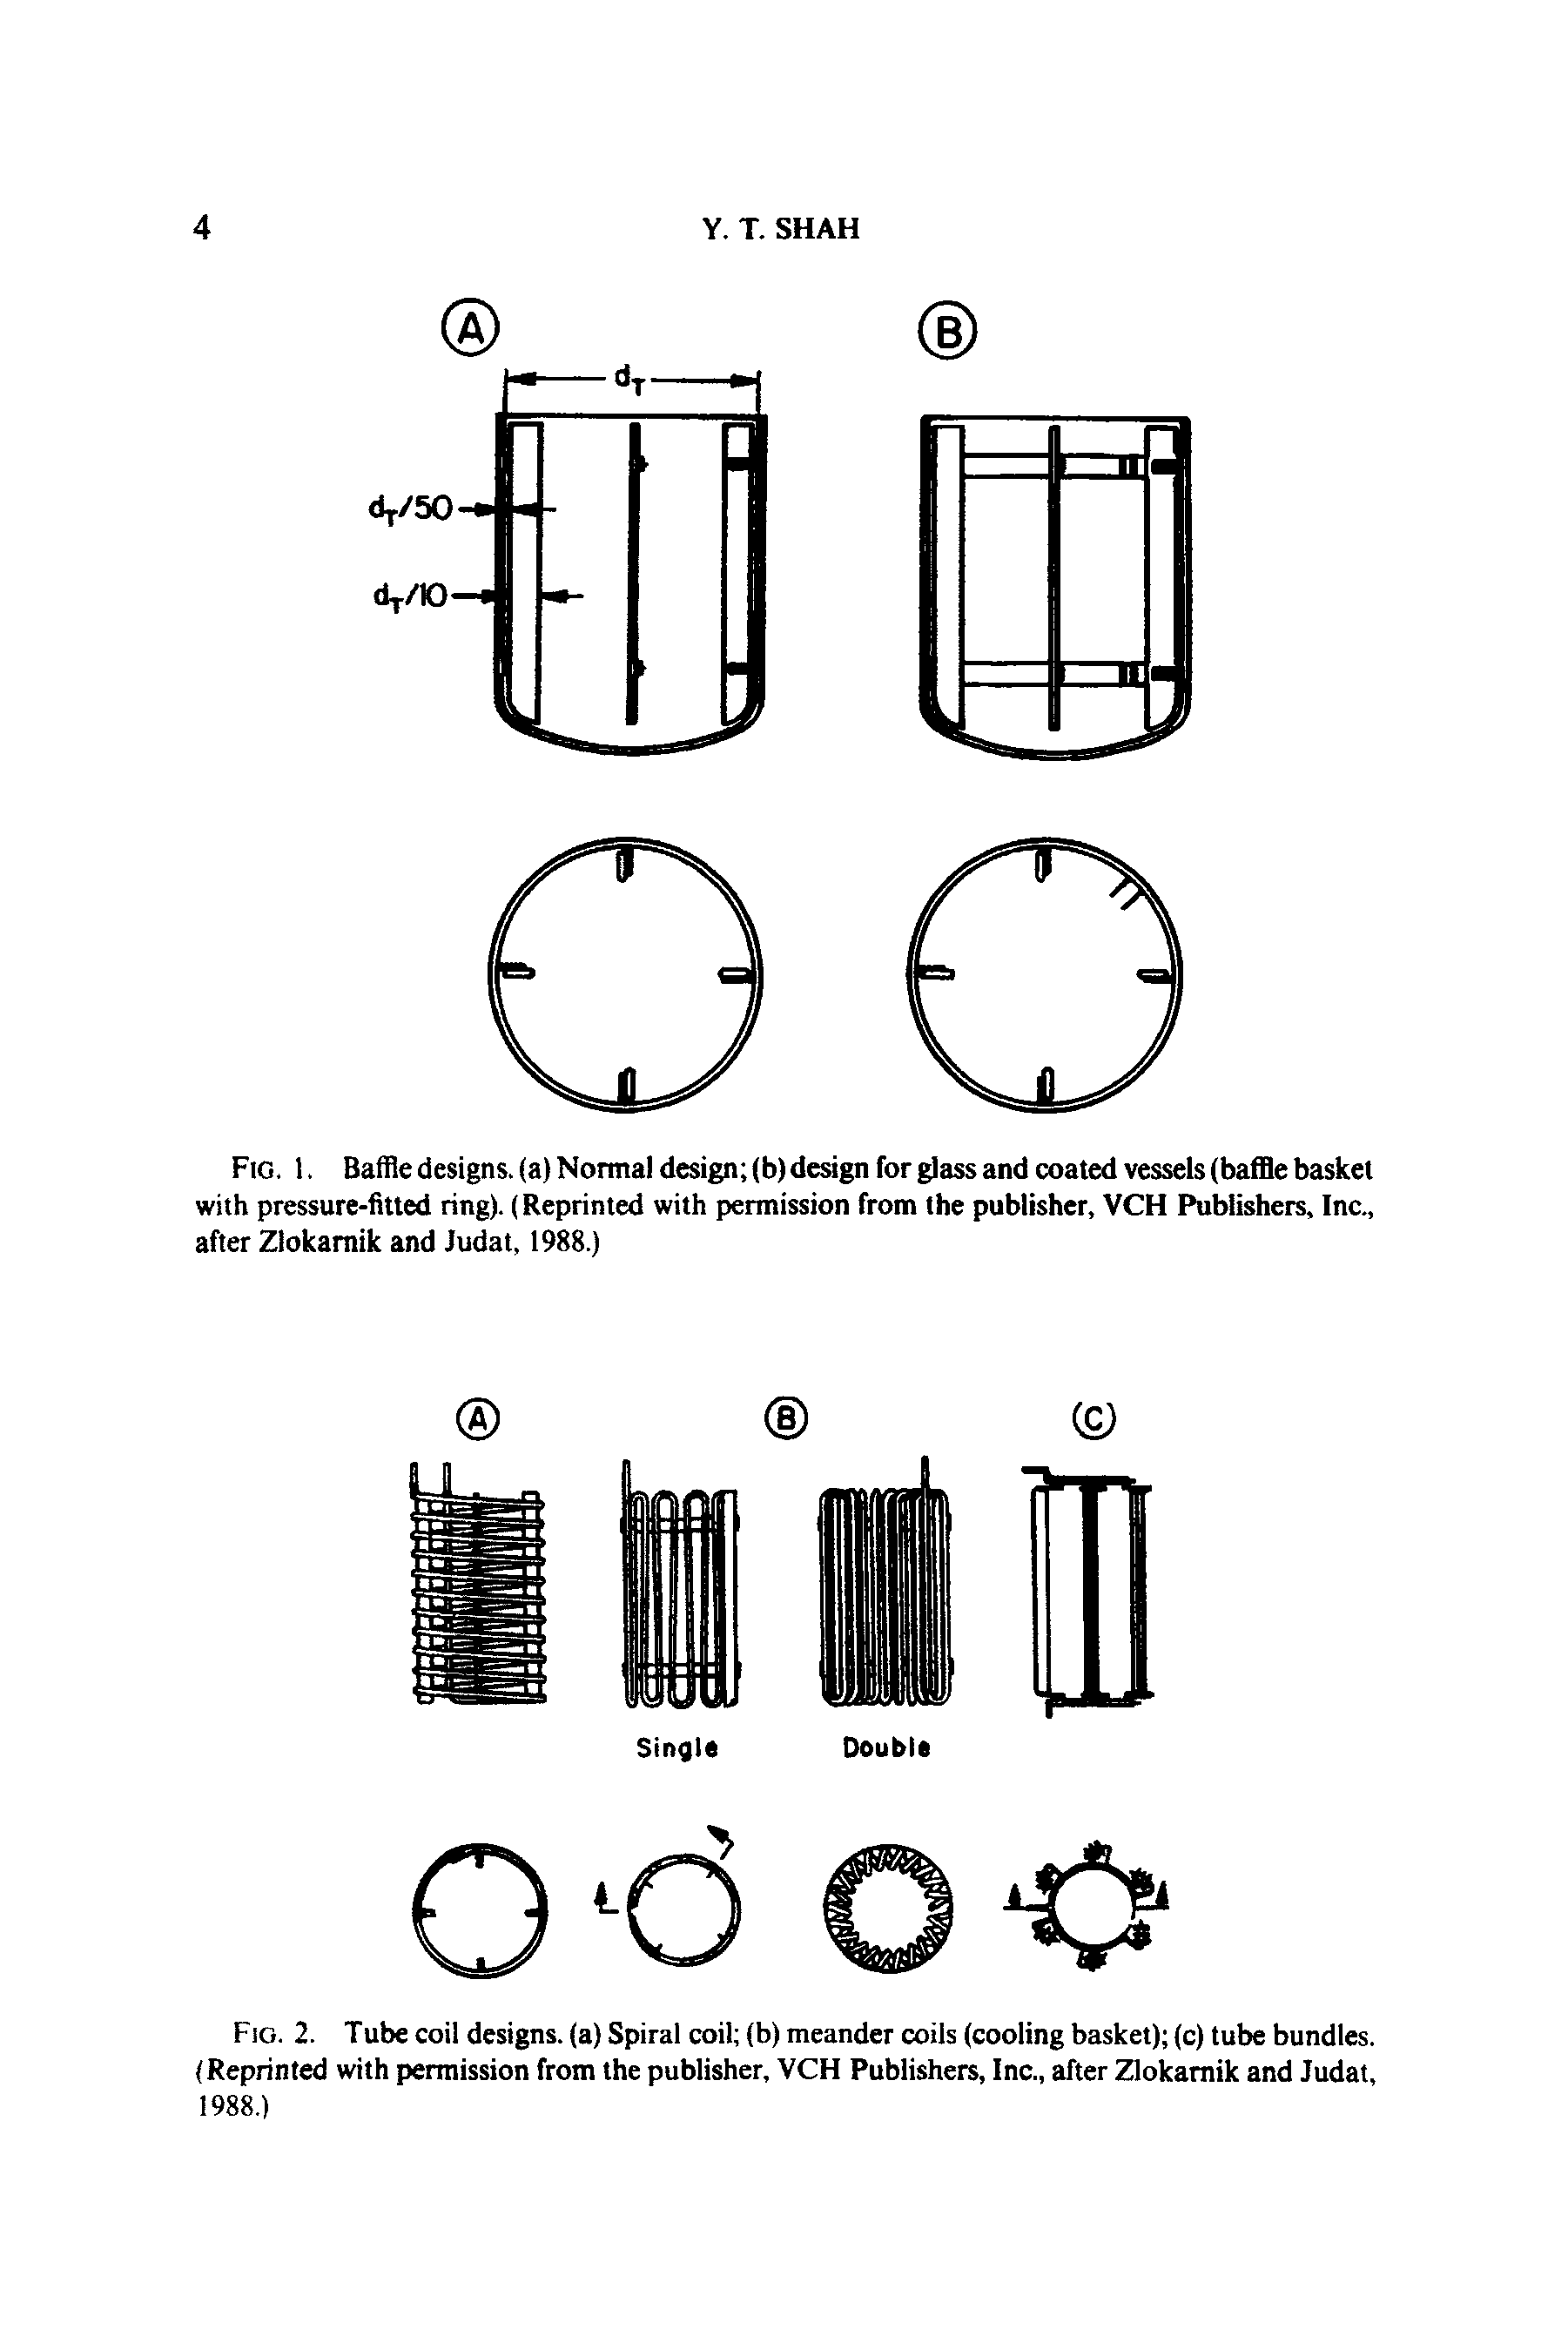 Fig. 1. Baffle designs, (a) Normal design (b) design for glass and coated vessels (baffle basket with pressure-fitted ring). (Reprinted with permission from the publisher, VCH Publishers, Inc., after Zlokarnik and Judat, 1988.)...